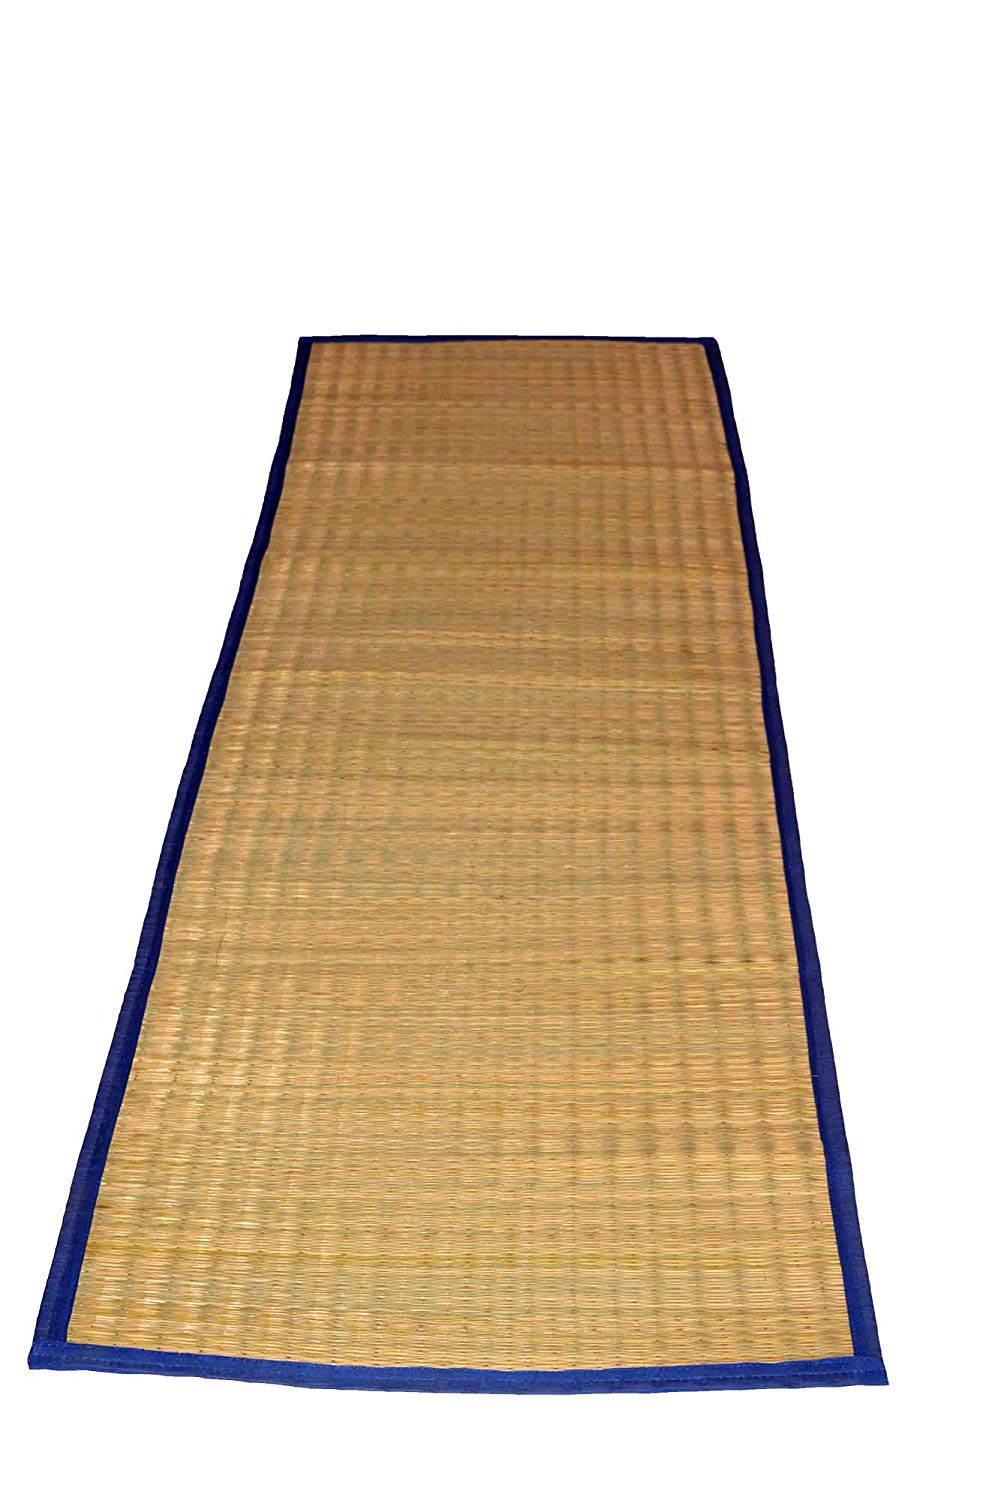 MONTISA Yoga Mat made of Grass, eco-friendly, portable in best price